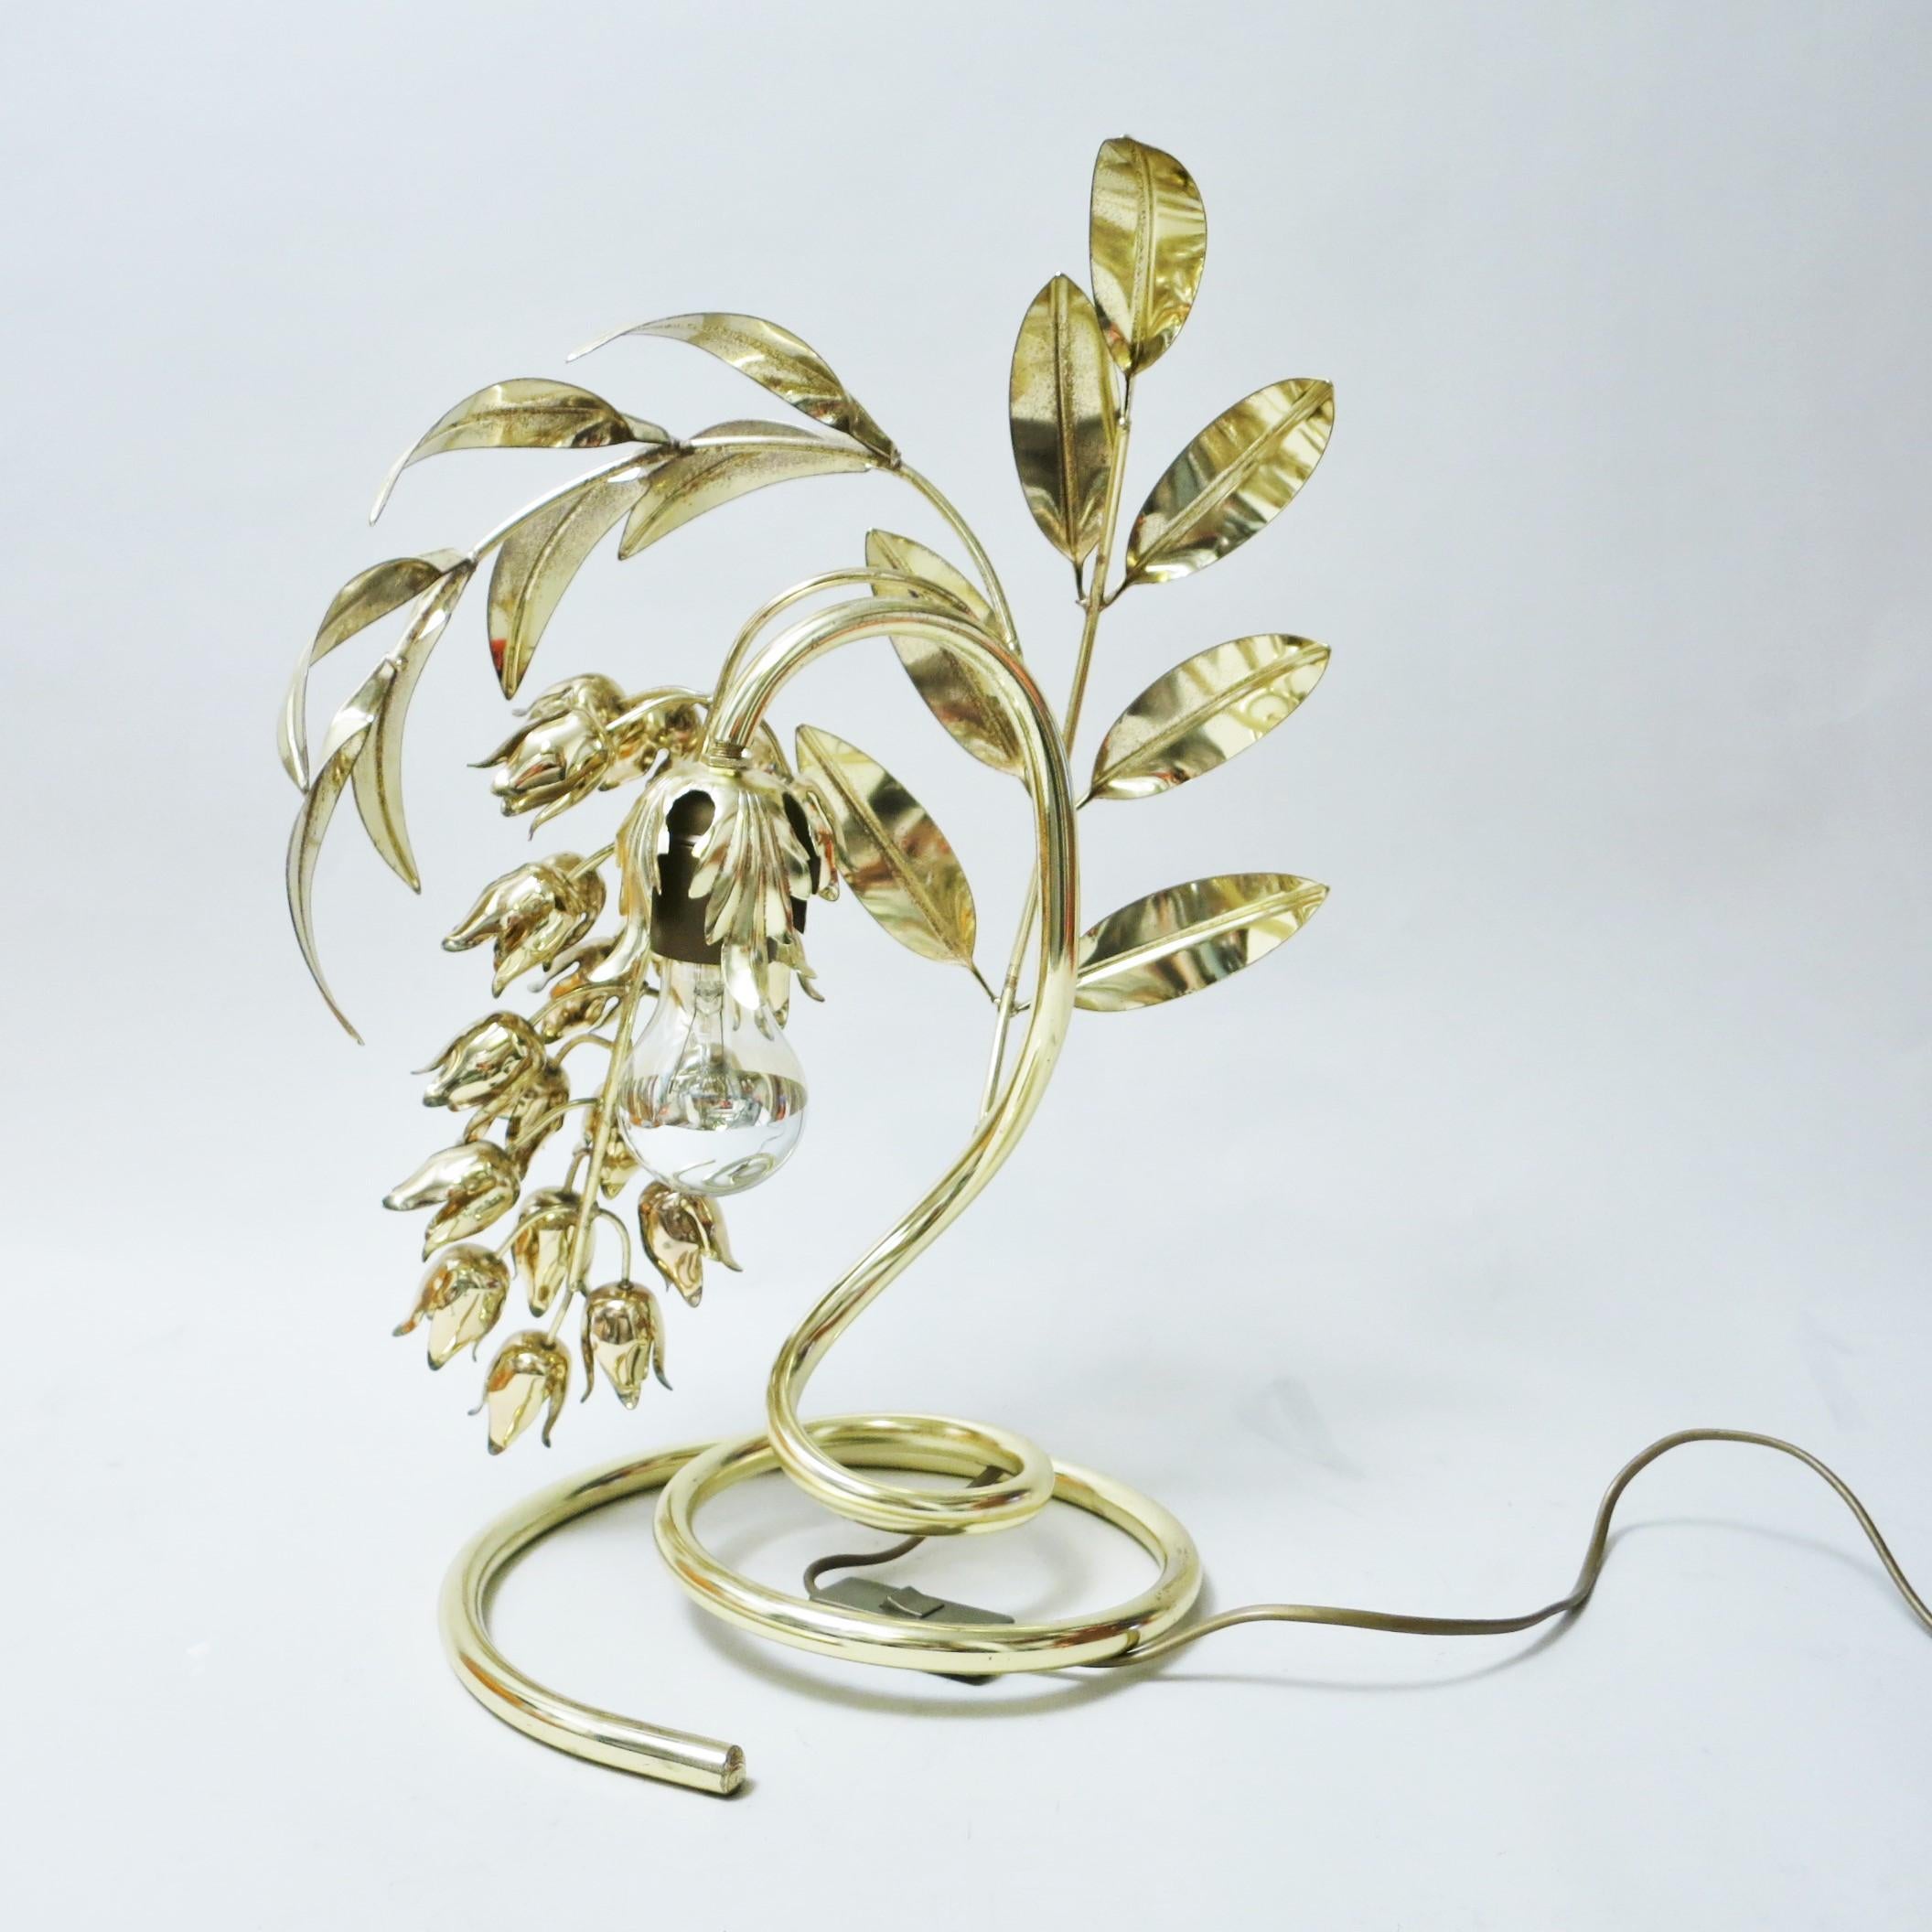 This gilded metal wisteria flower lamp was designed in the Hollywood Regency style by Hans Kögl in the 1970s.